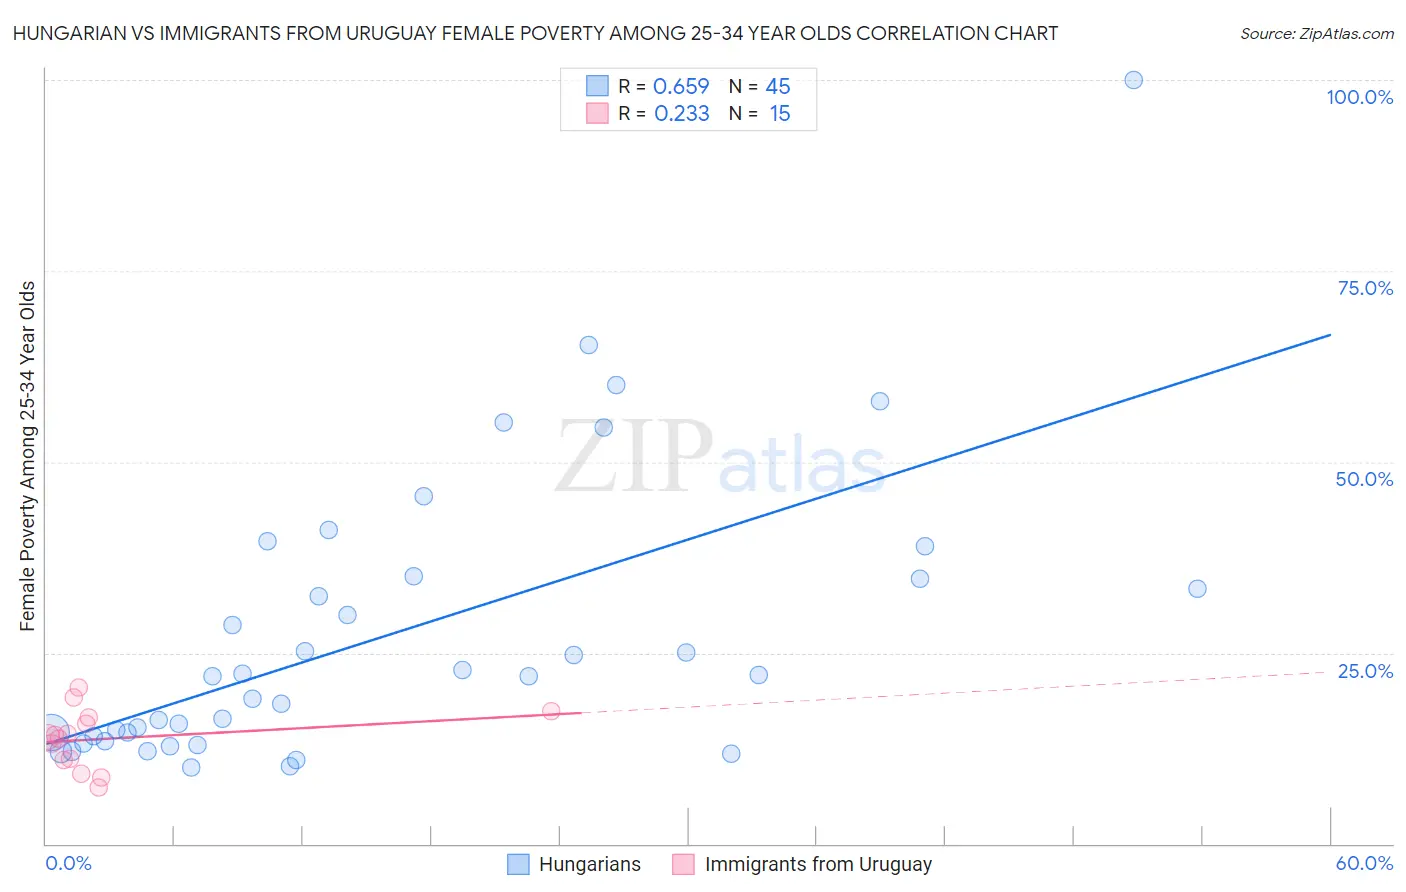 Hungarian vs Immigrants from Uruguay Female Poverty Among 25-34 Year Olds